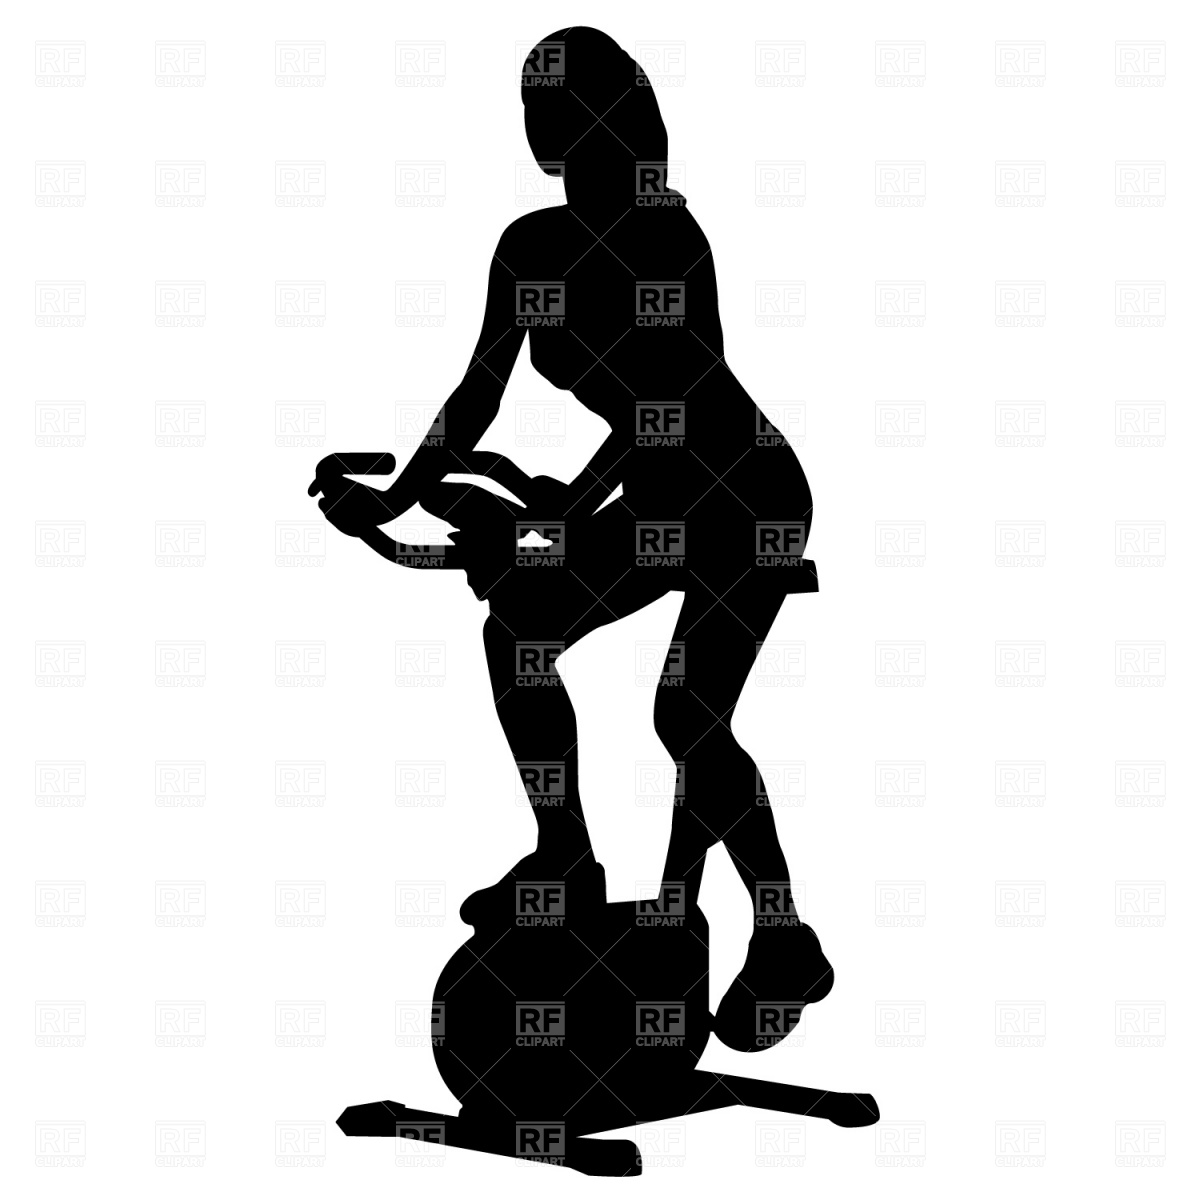 On Exercise Bicycle 1192 Download Royalty Free Vector Clipart  Eps